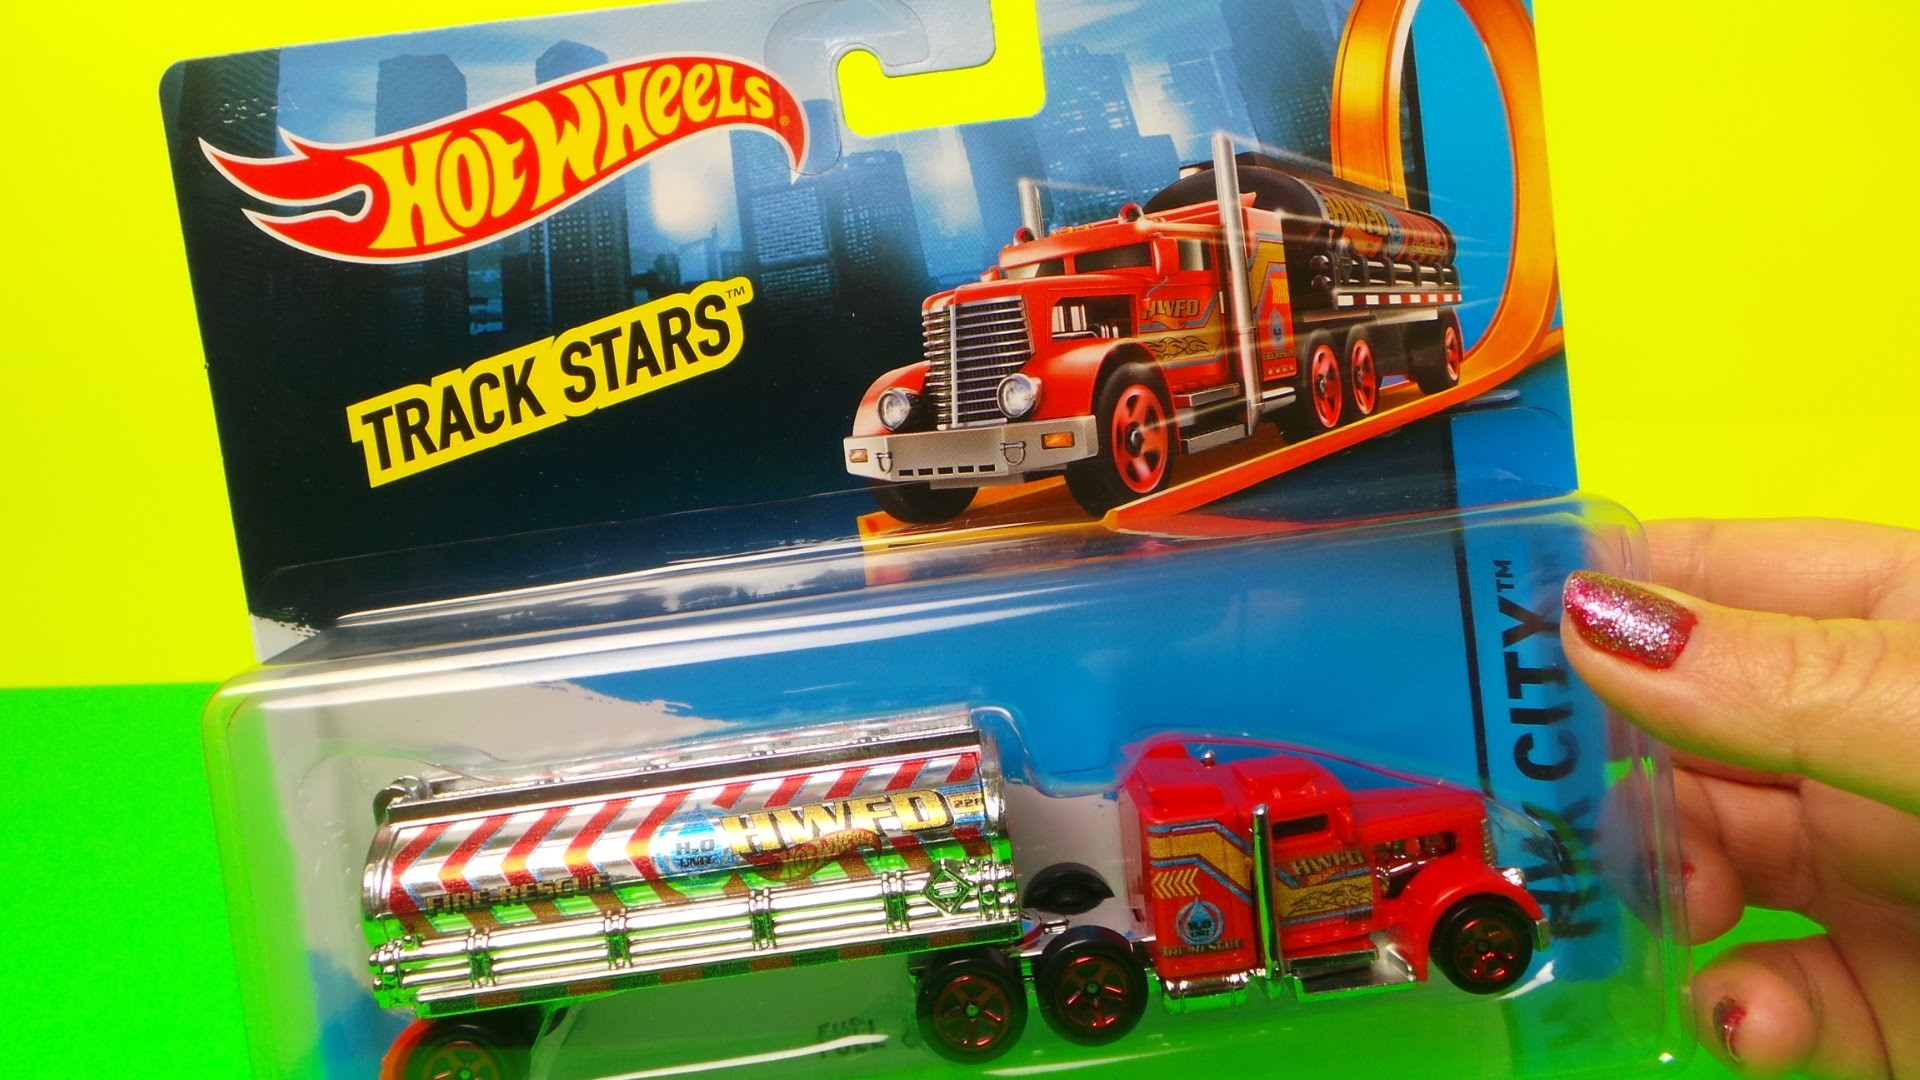 1920x1080 OPENING AND UNBOXING OF THE HOT WHEELS TRACK STARS CHROME FIRE ENGINE H20  WATER TRUCK TOY - YouTube